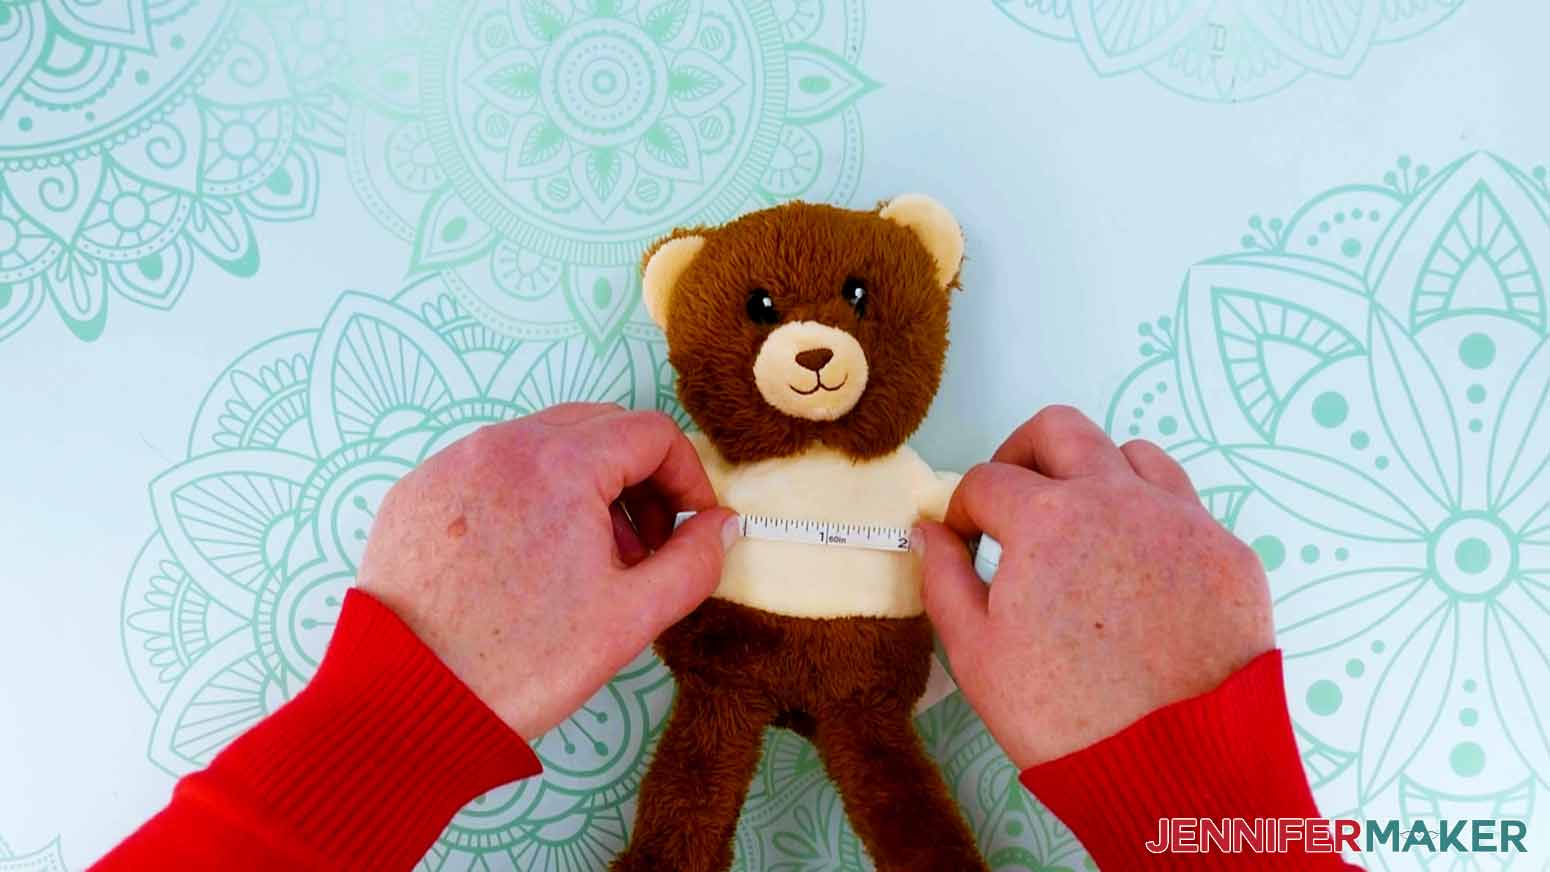 The crafter is using a ruler to measure the dimensions of the stuffed bear's shirt.